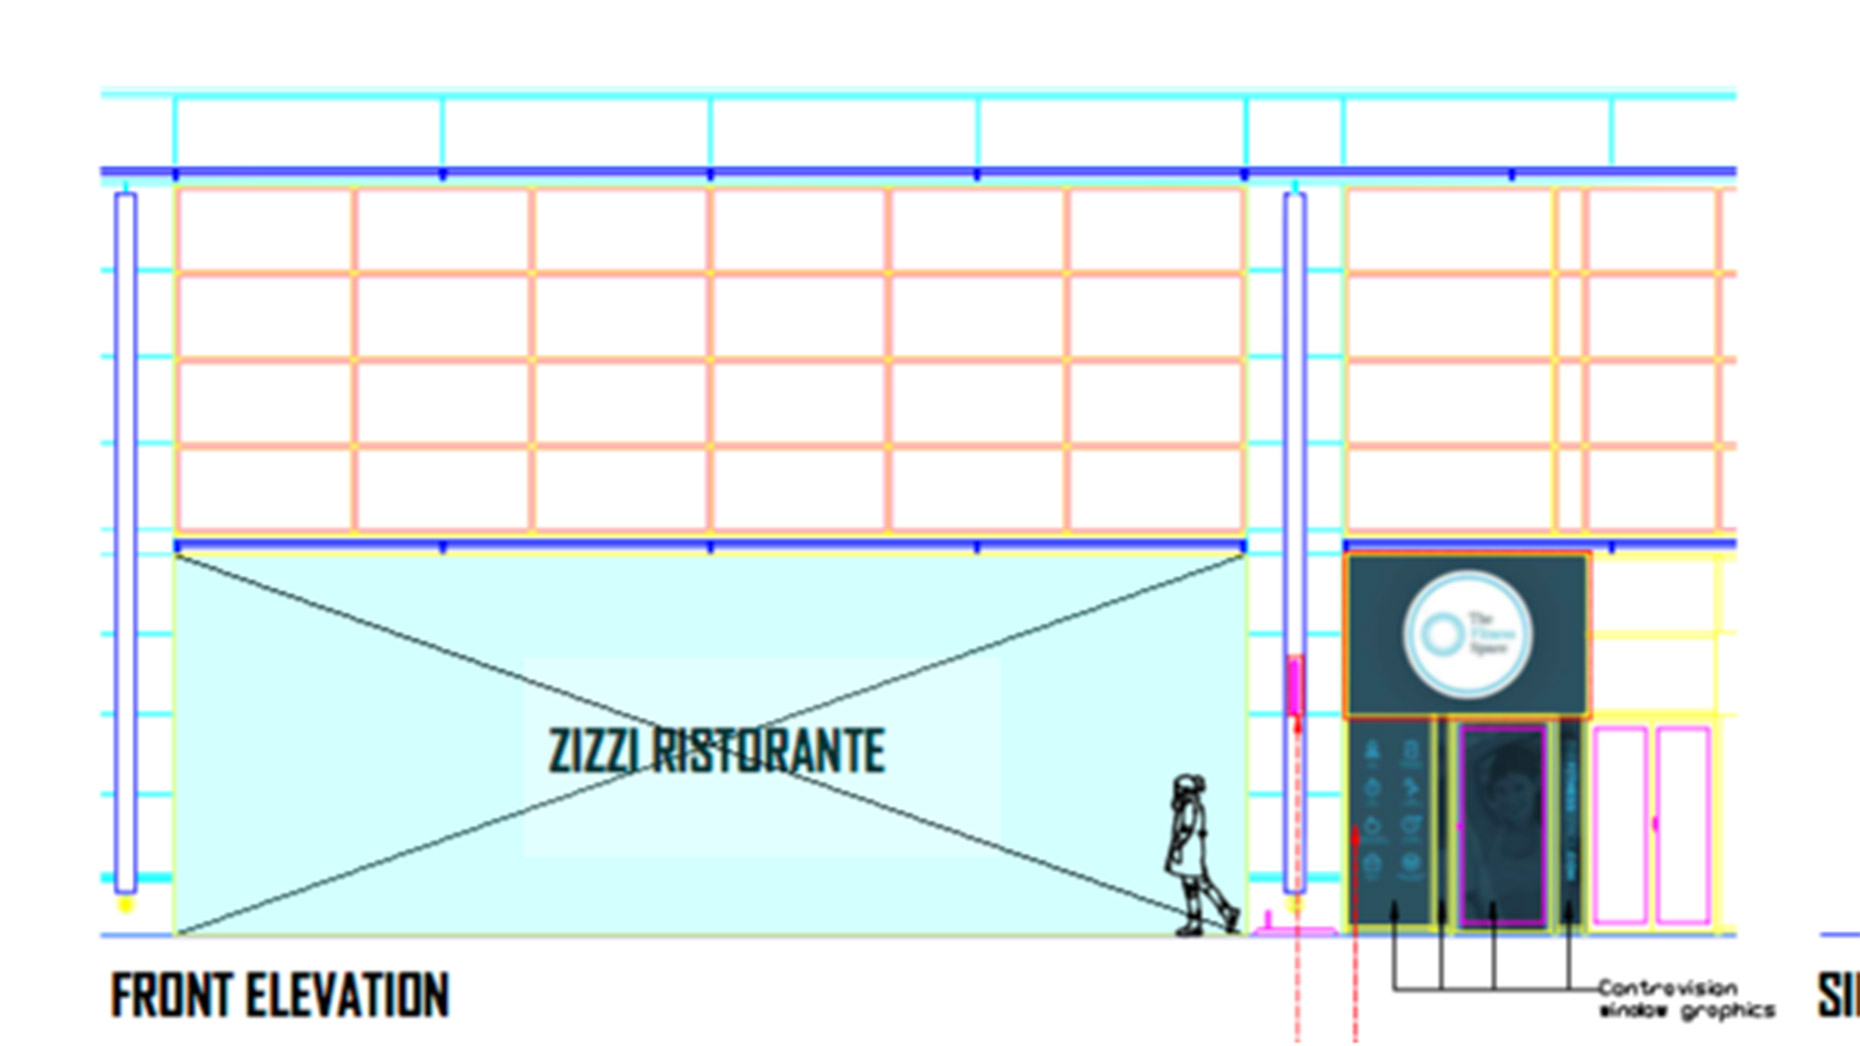 The new gym would be accessed via a door next to Zizzi